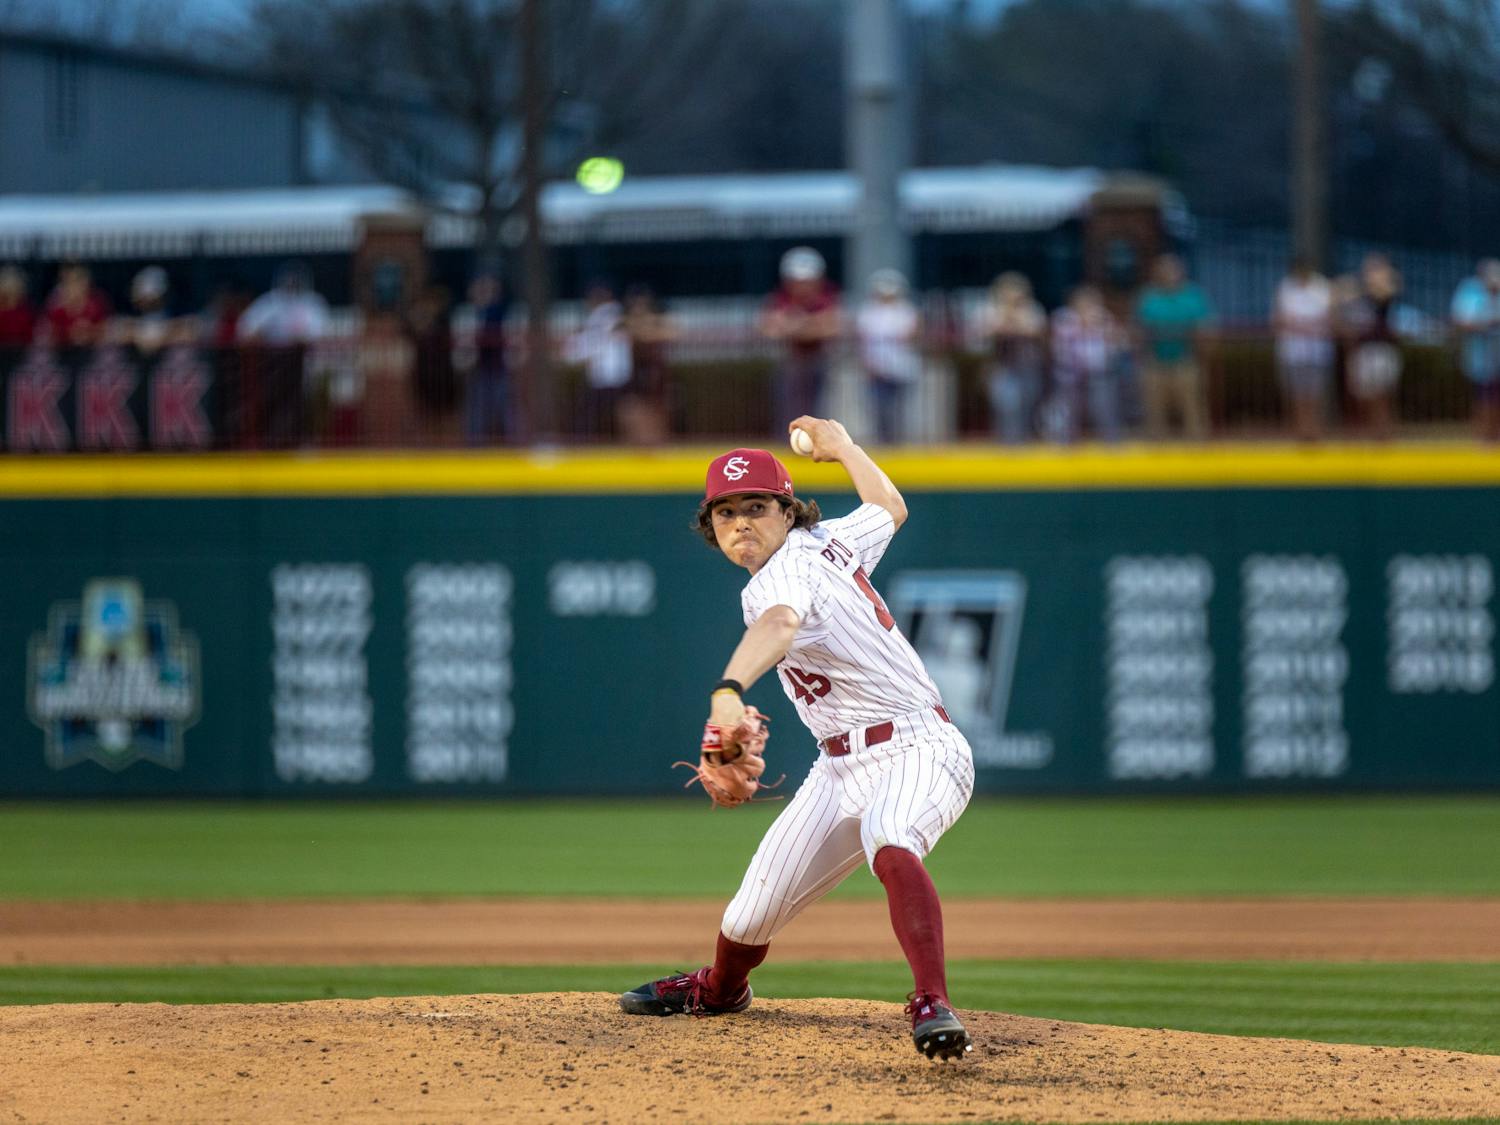 Throwing from the top of the mound, fifth-year pitcher Nick Proctor winds up to through the ball for the Gamecocks' game against the Fighting Quakers at Founders Park on Feb. 24, 2023. South Carolina made seven total home runs within the nine innings, finishing with a score of 7-4.